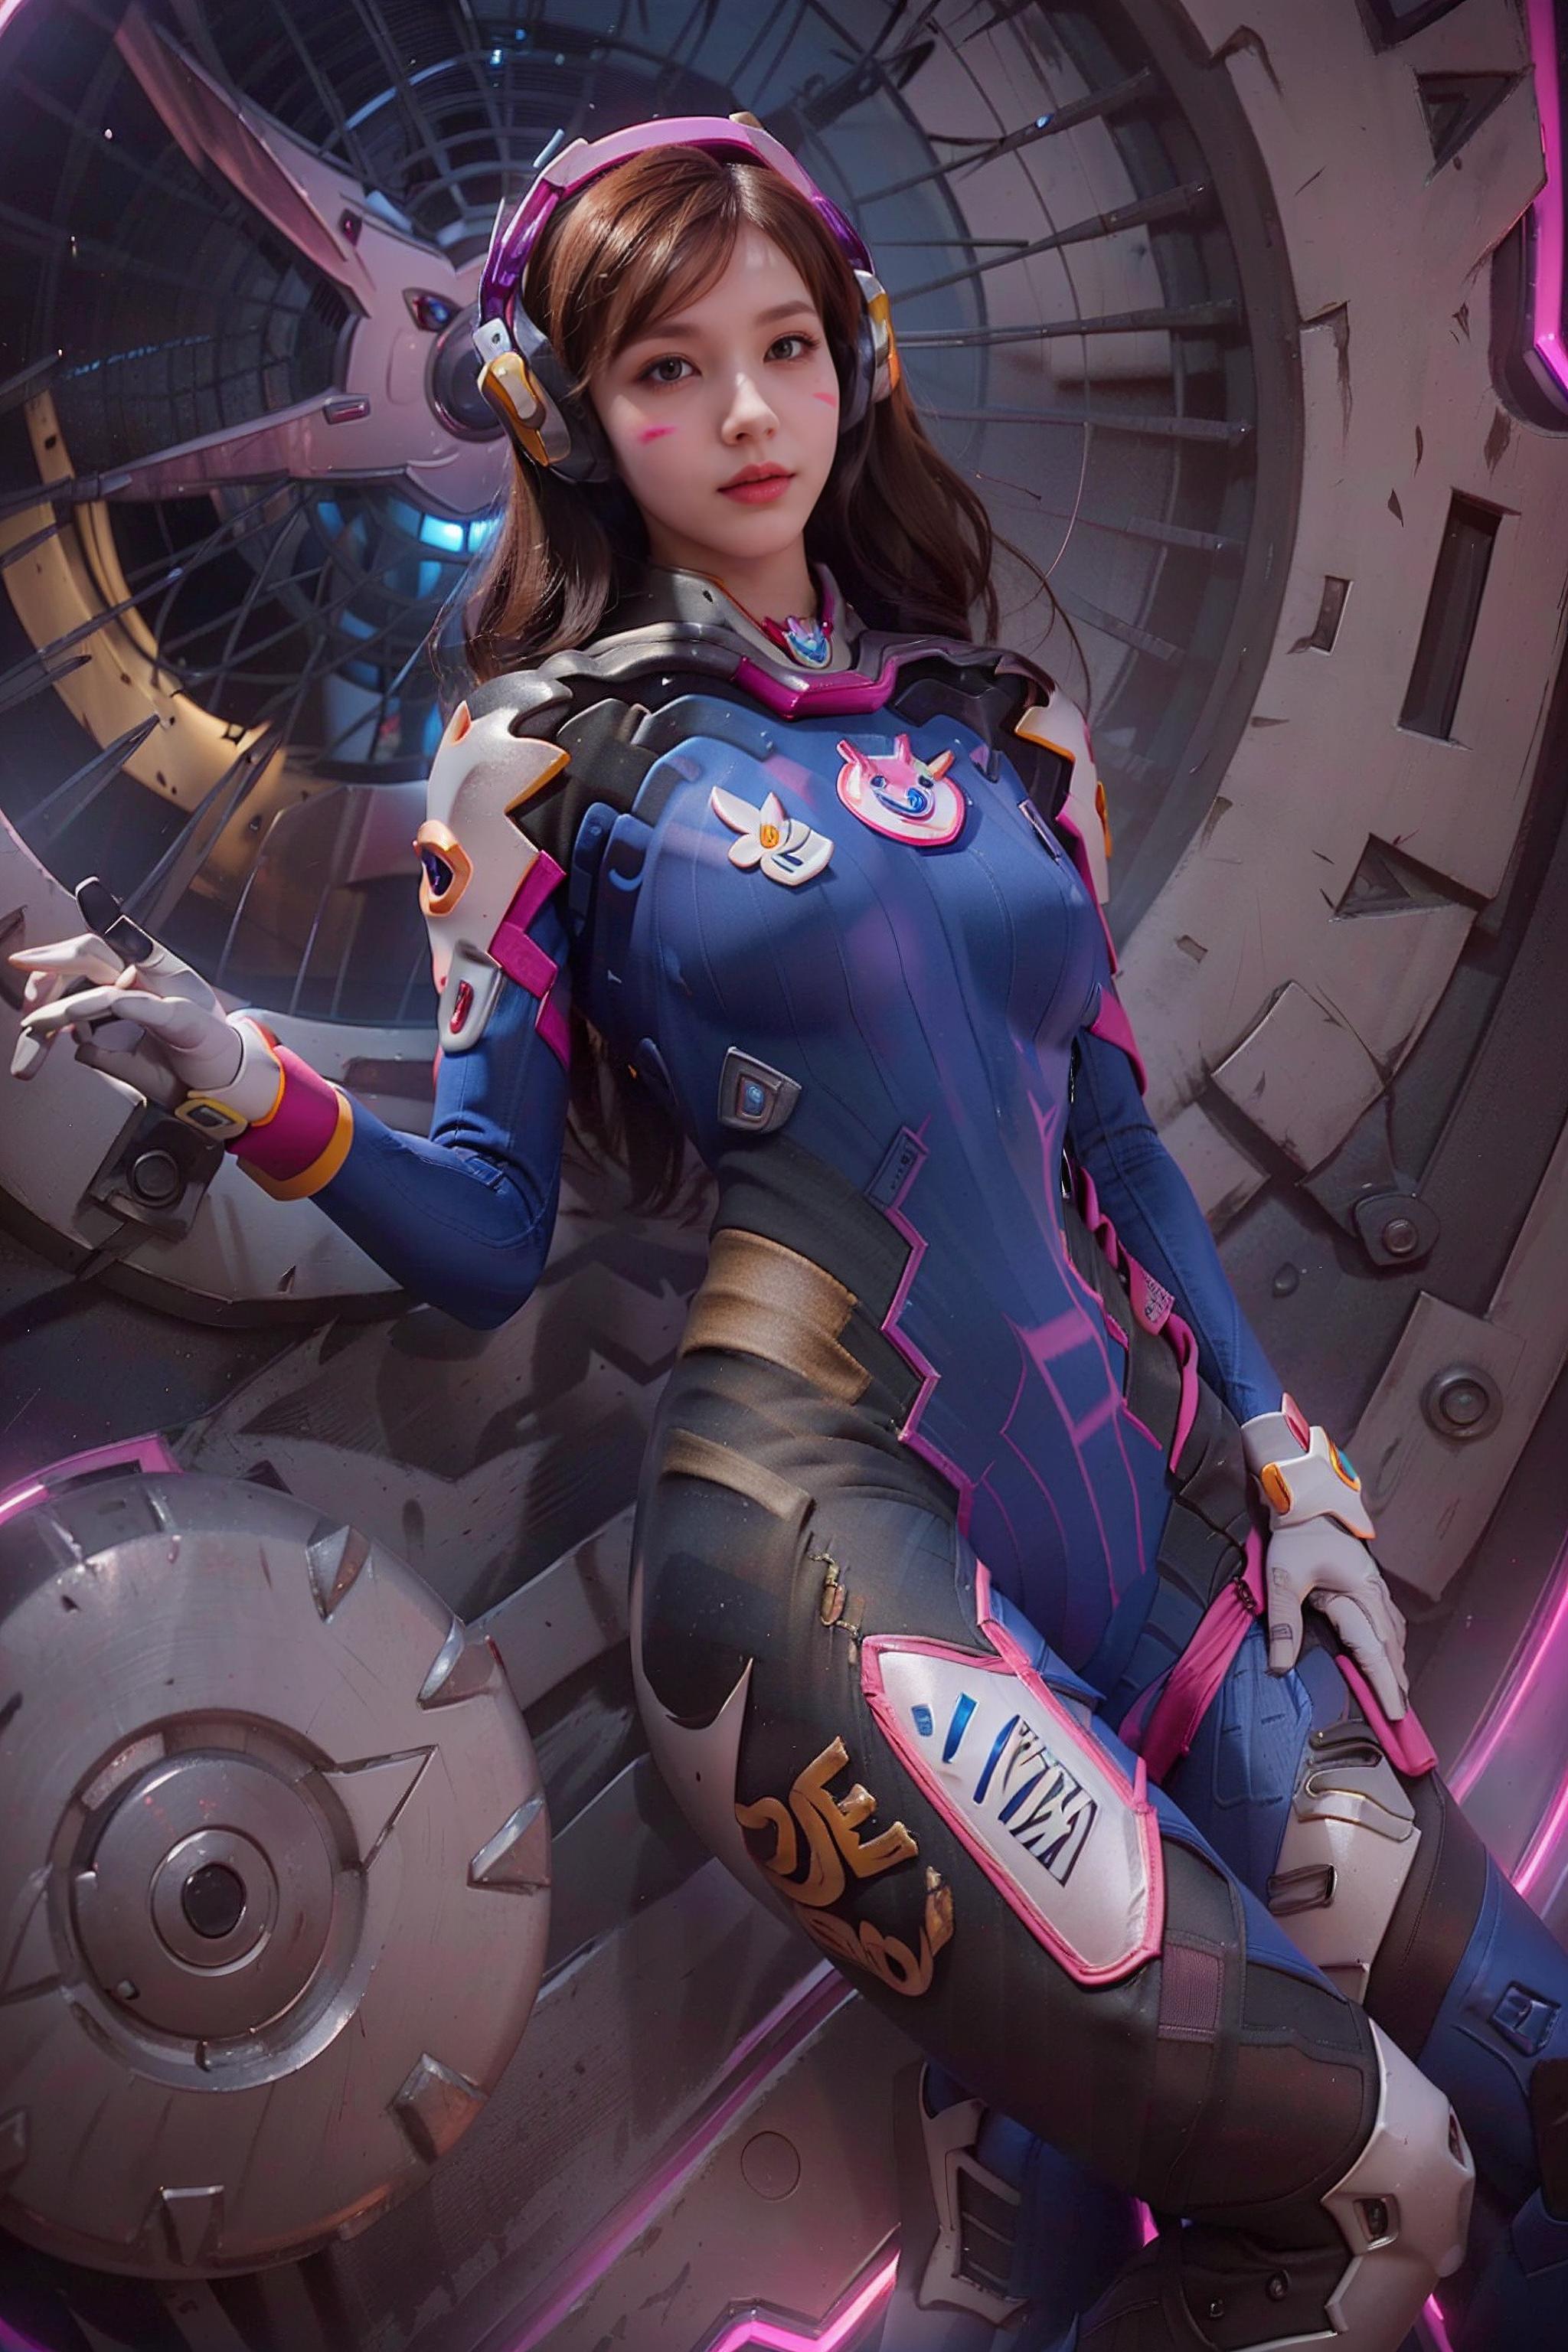 Tau's D.Va Cosplay image by Tauron